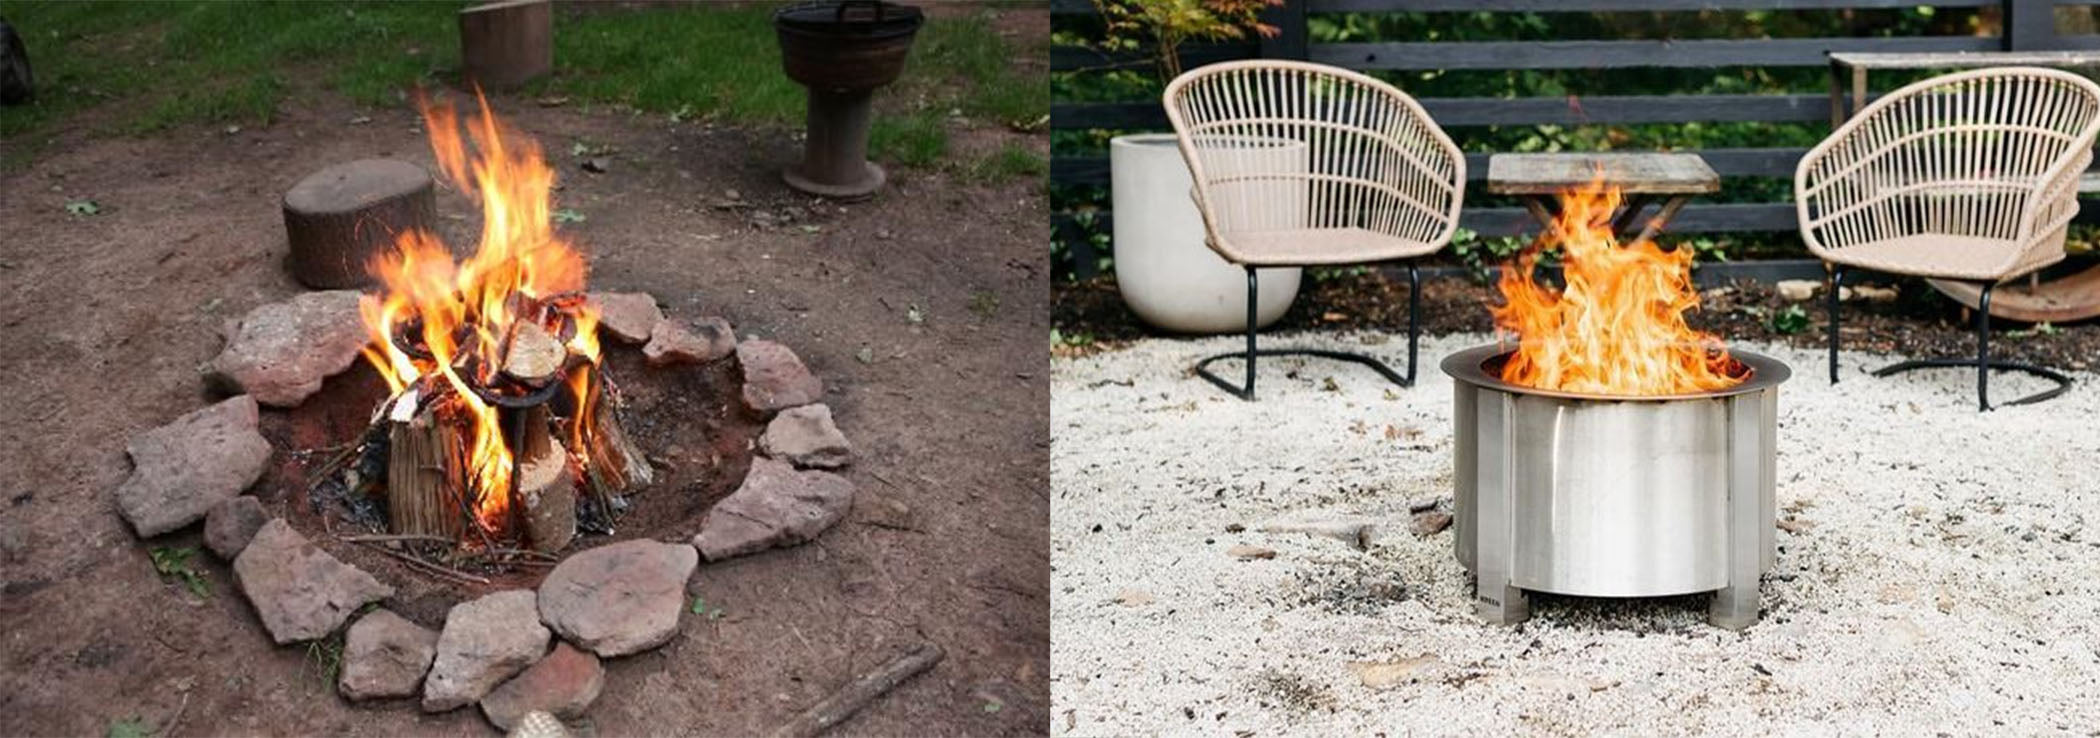 a side by side image of a traditional fire pit and a smokeless fire pit